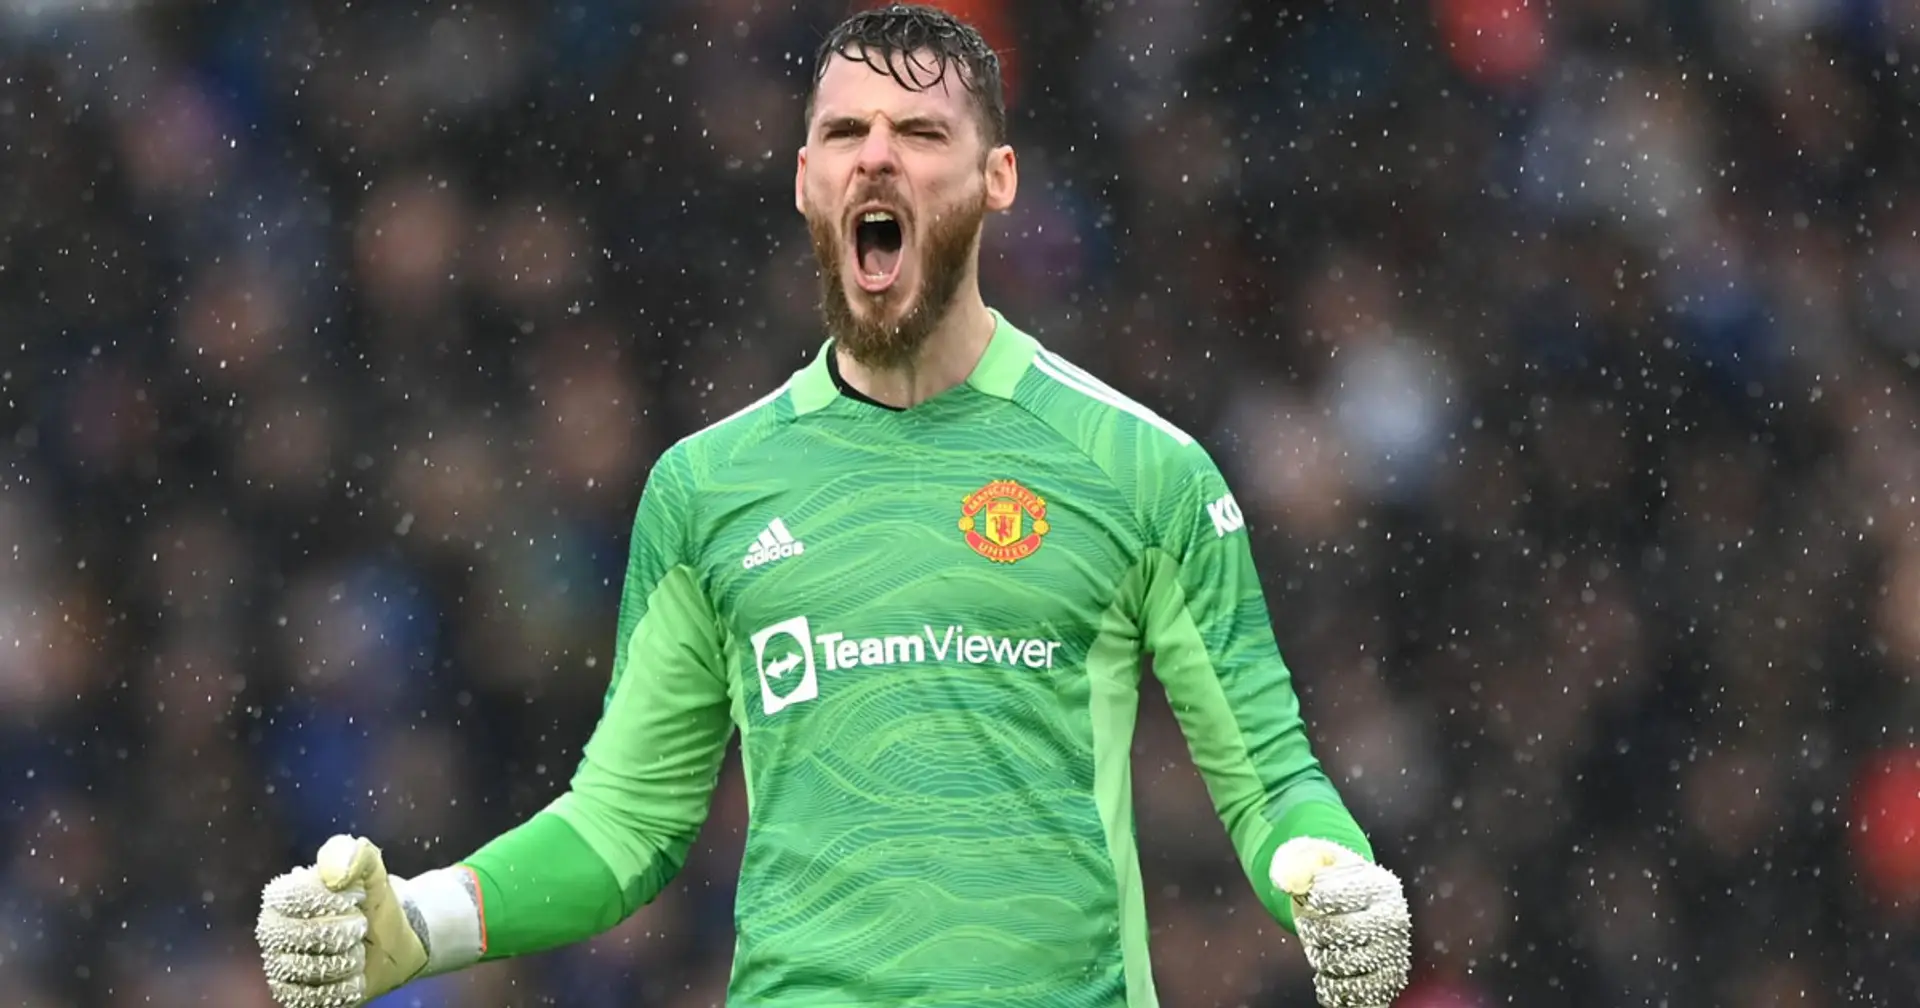 De Gea sets clean sheet record in Man United's draw against Watford